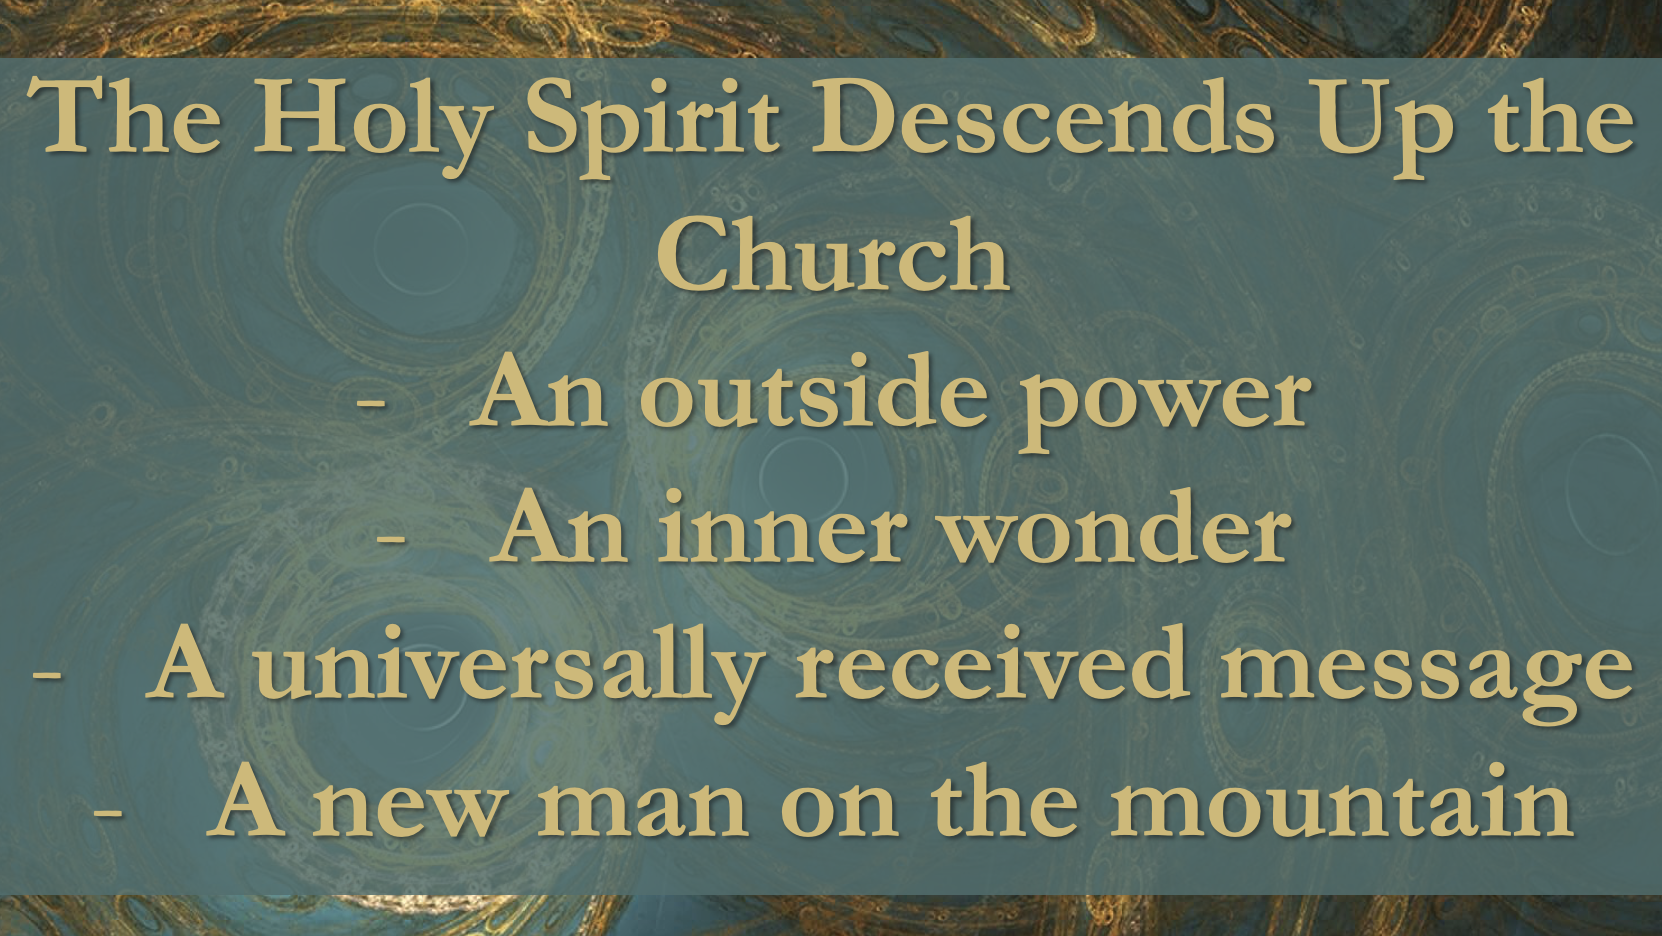 The Holy Spirit Descends Up the Church